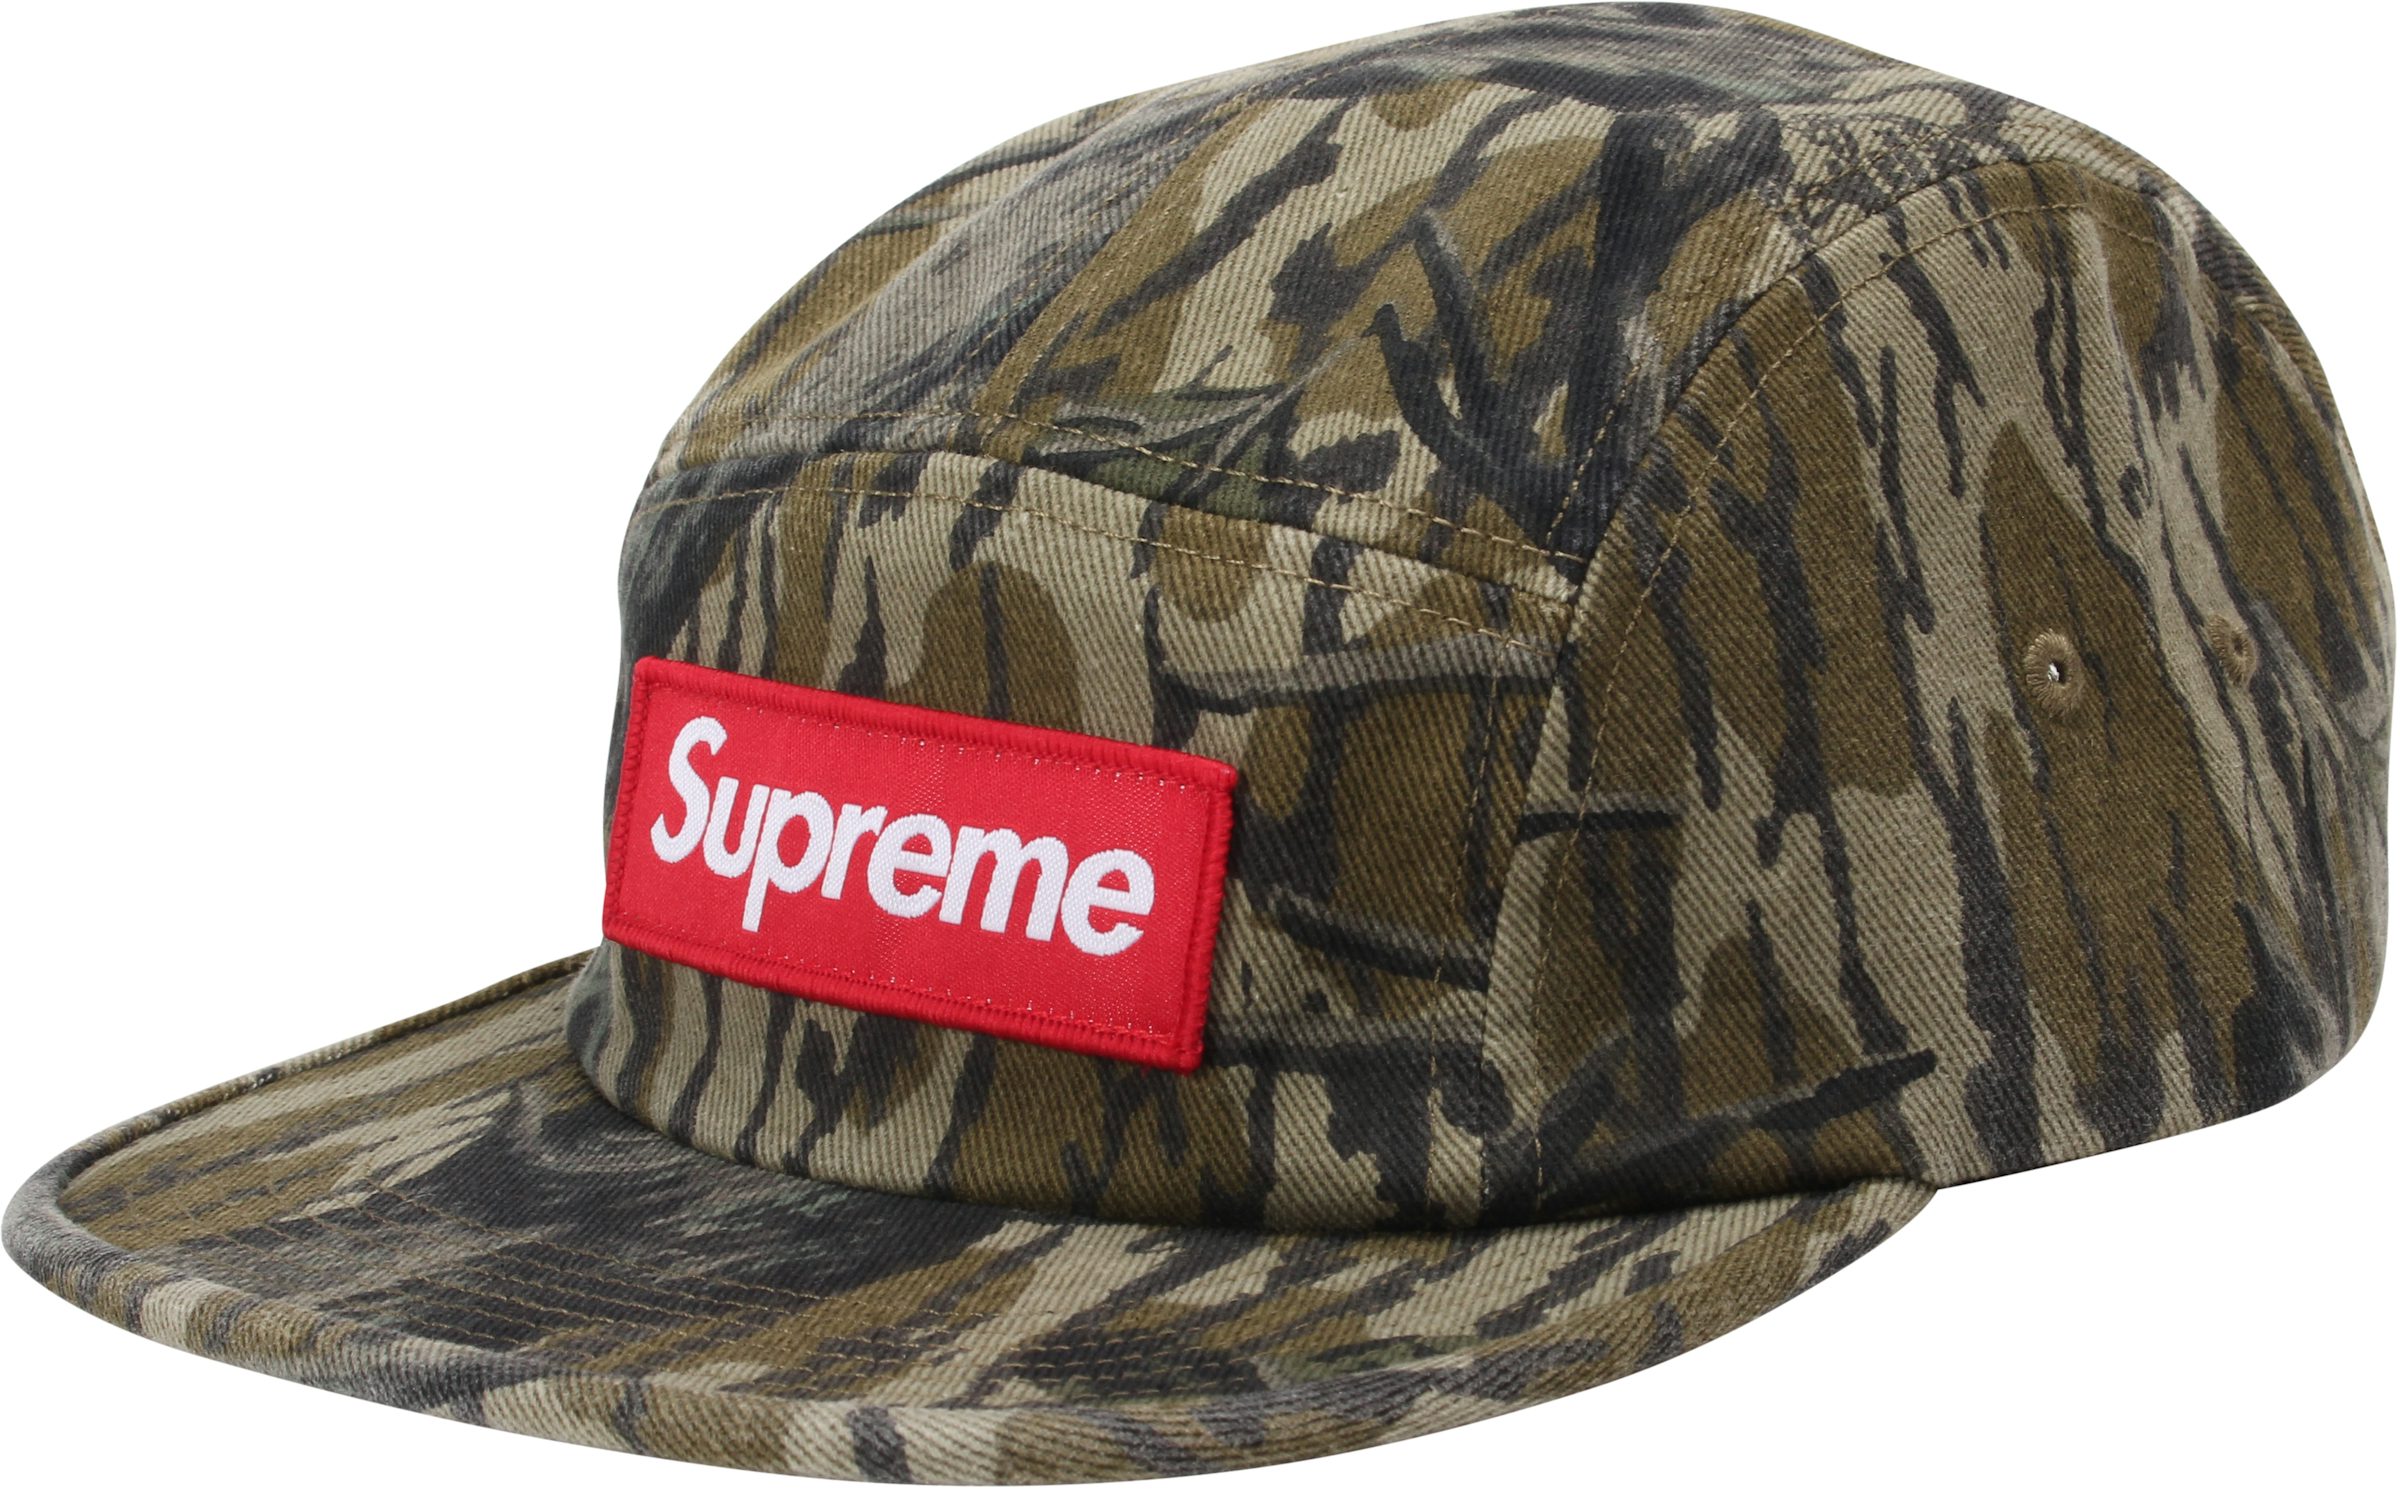 VINTAGE 2000S SUPREME 5-PANEL BOX LOGO CAMP CAP HAT ALL-OVER X MILITARY BLUE